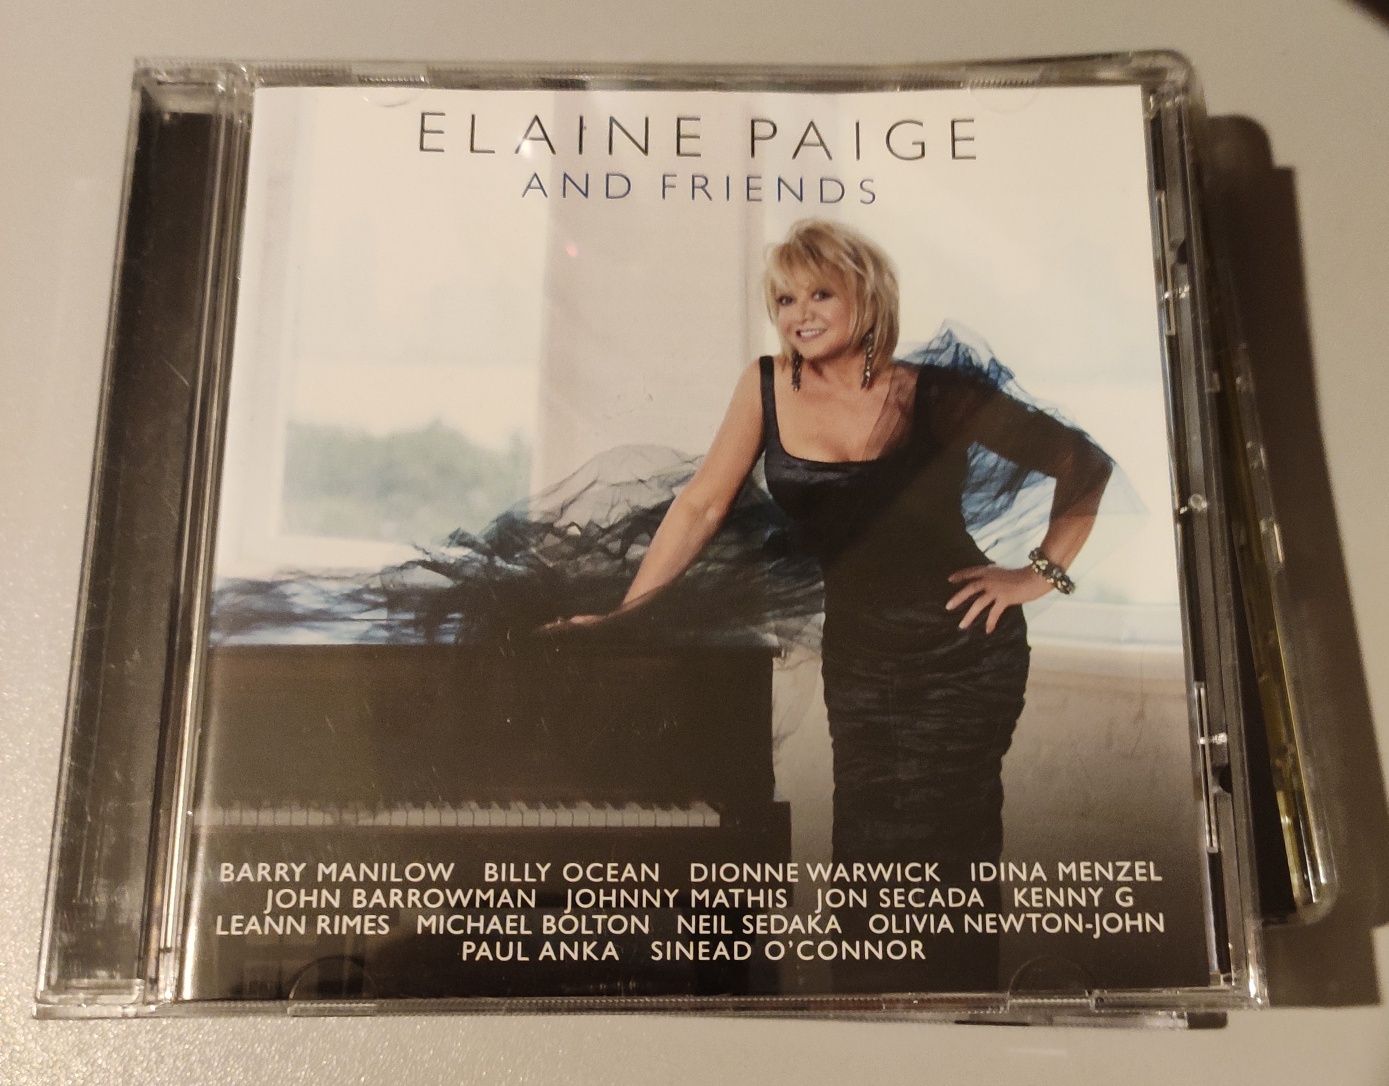 Elaine Paige and Friends. CD